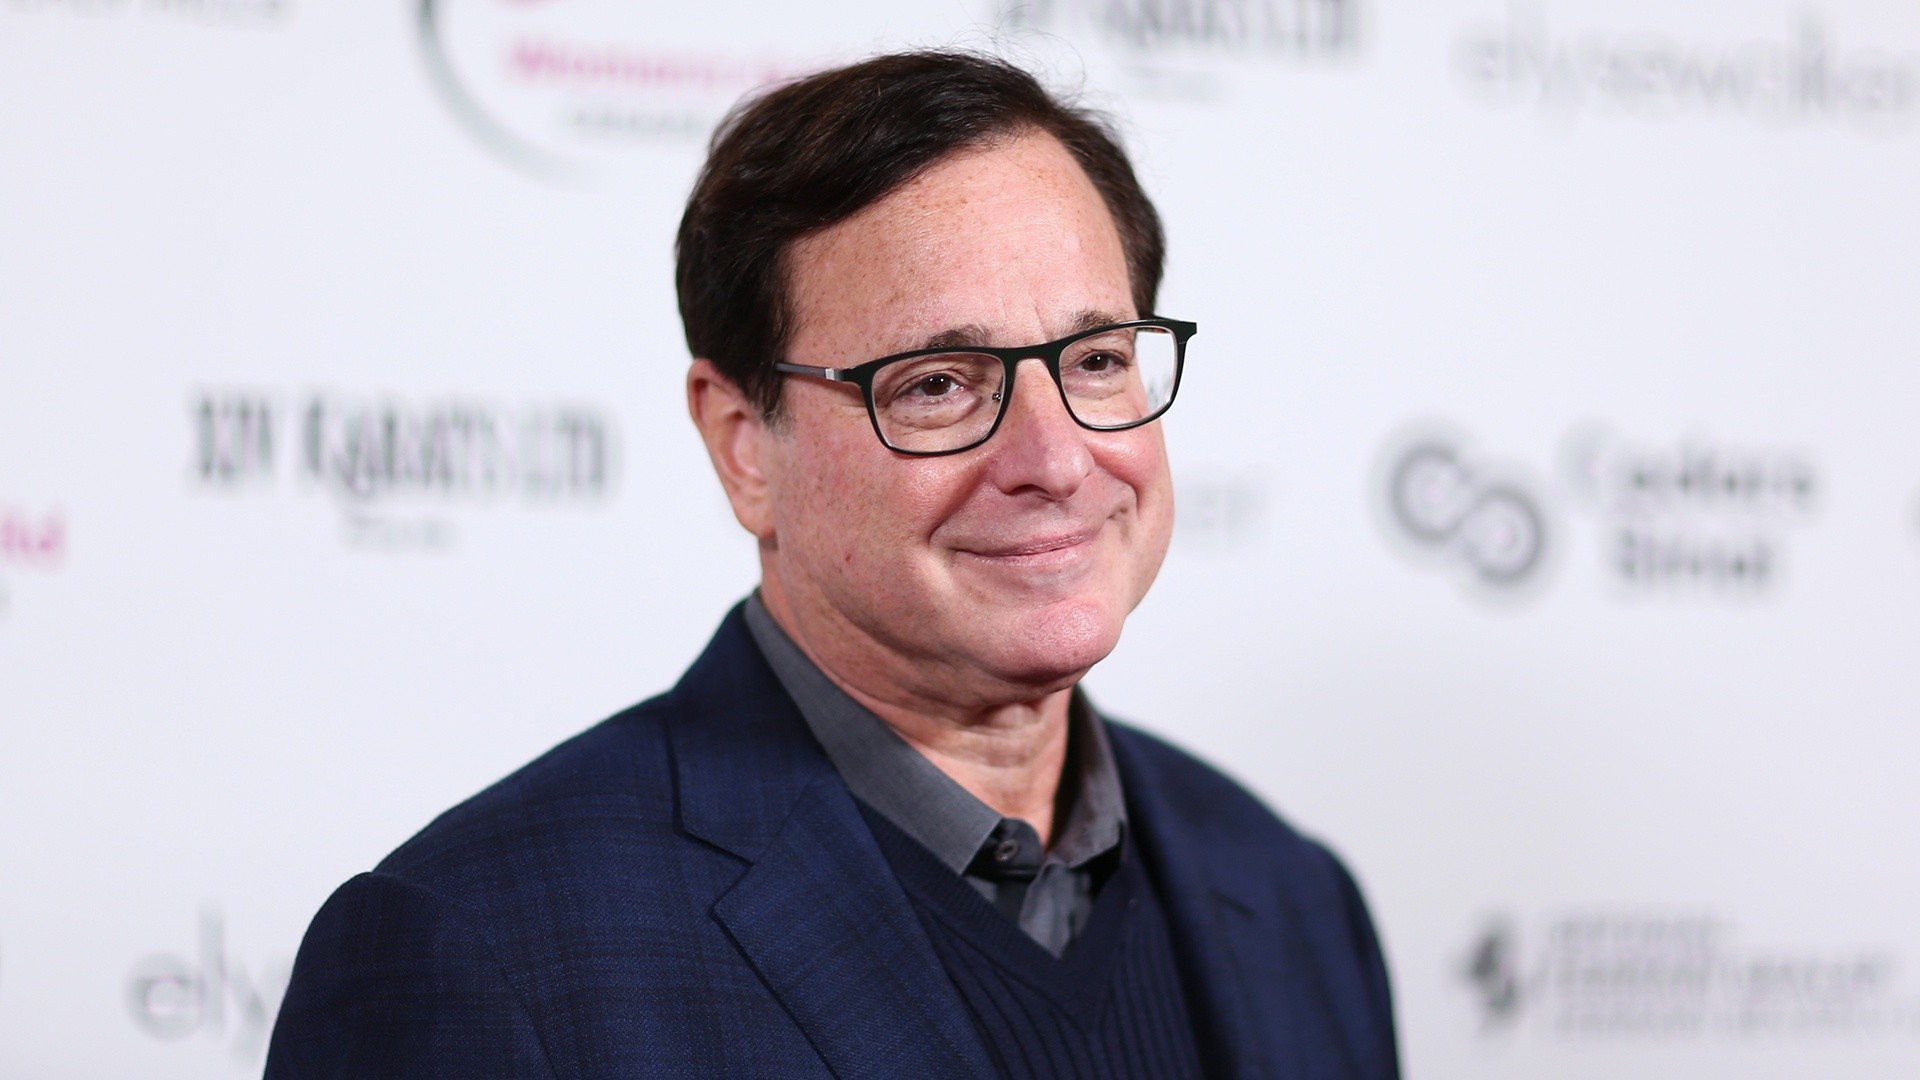 Photos of Bob Saget's hotel room released